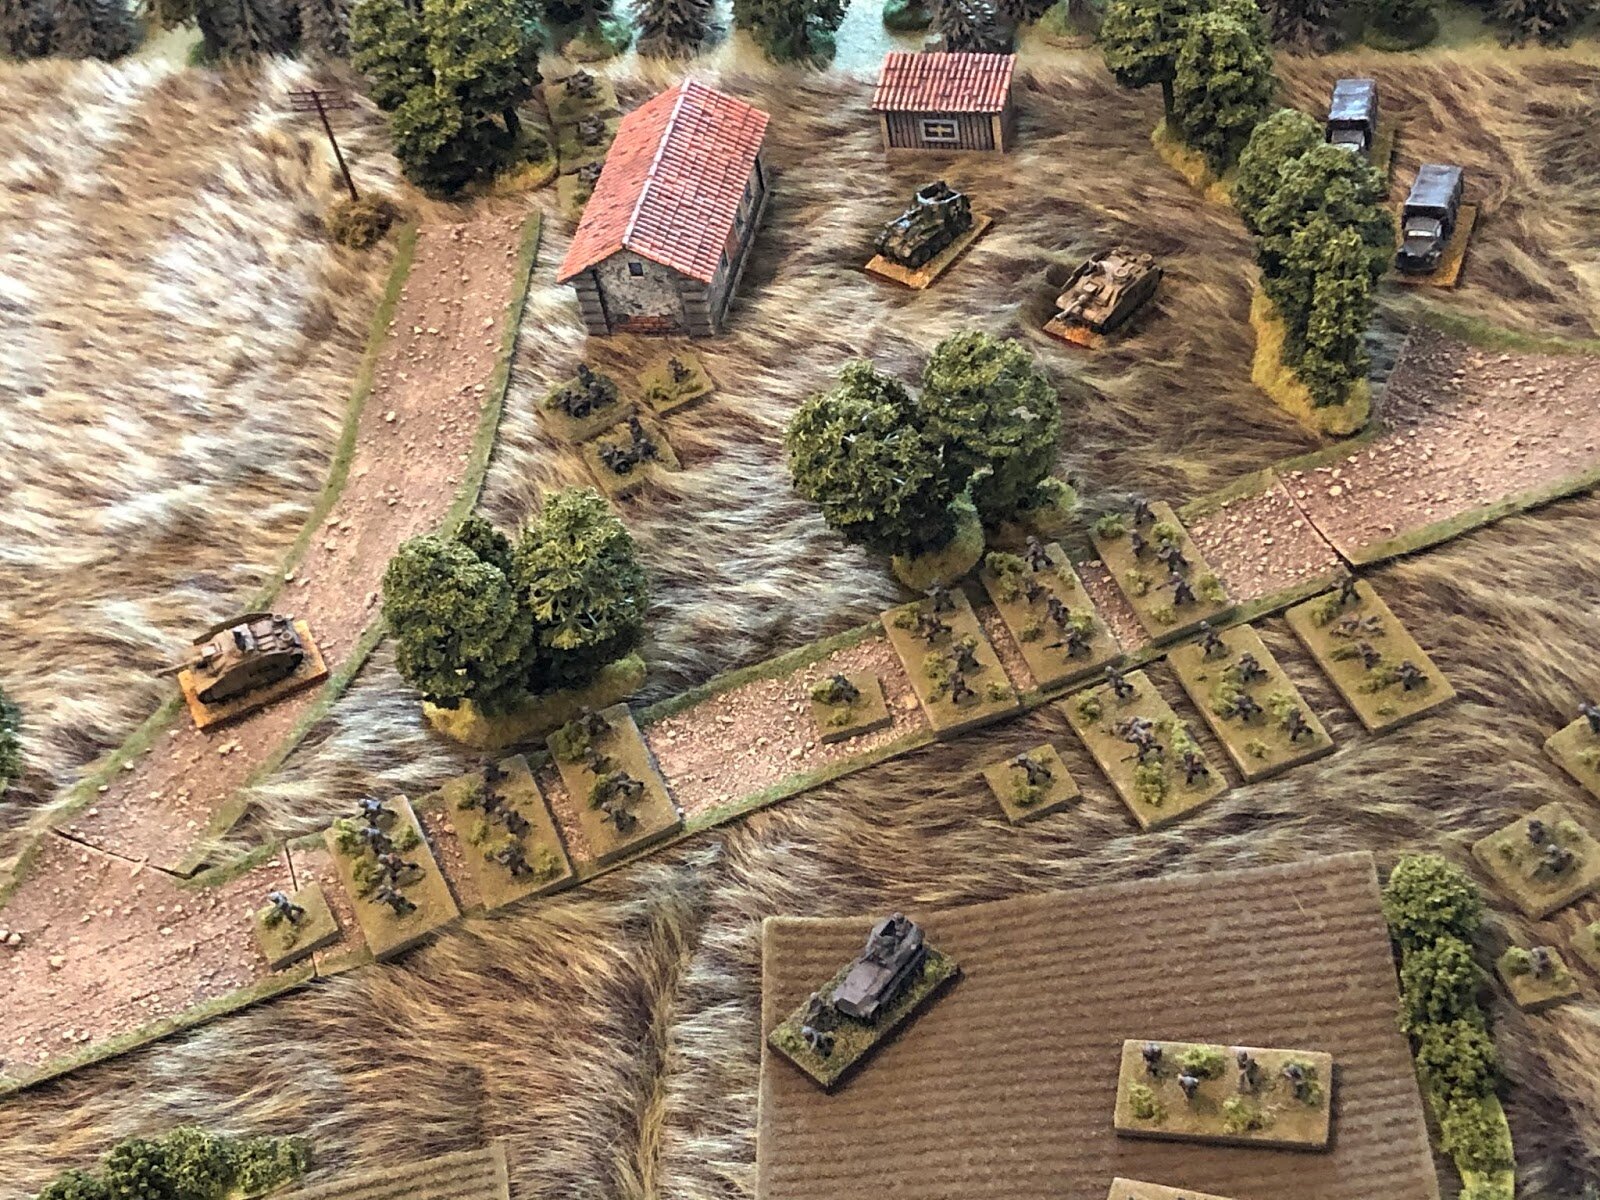 The German 1st Company is moving in fits and starts, experiencing a traffic jam on the road, as the lead Stug, the Platoon Commander's vehicle, pushes ahead (far left, from top center).